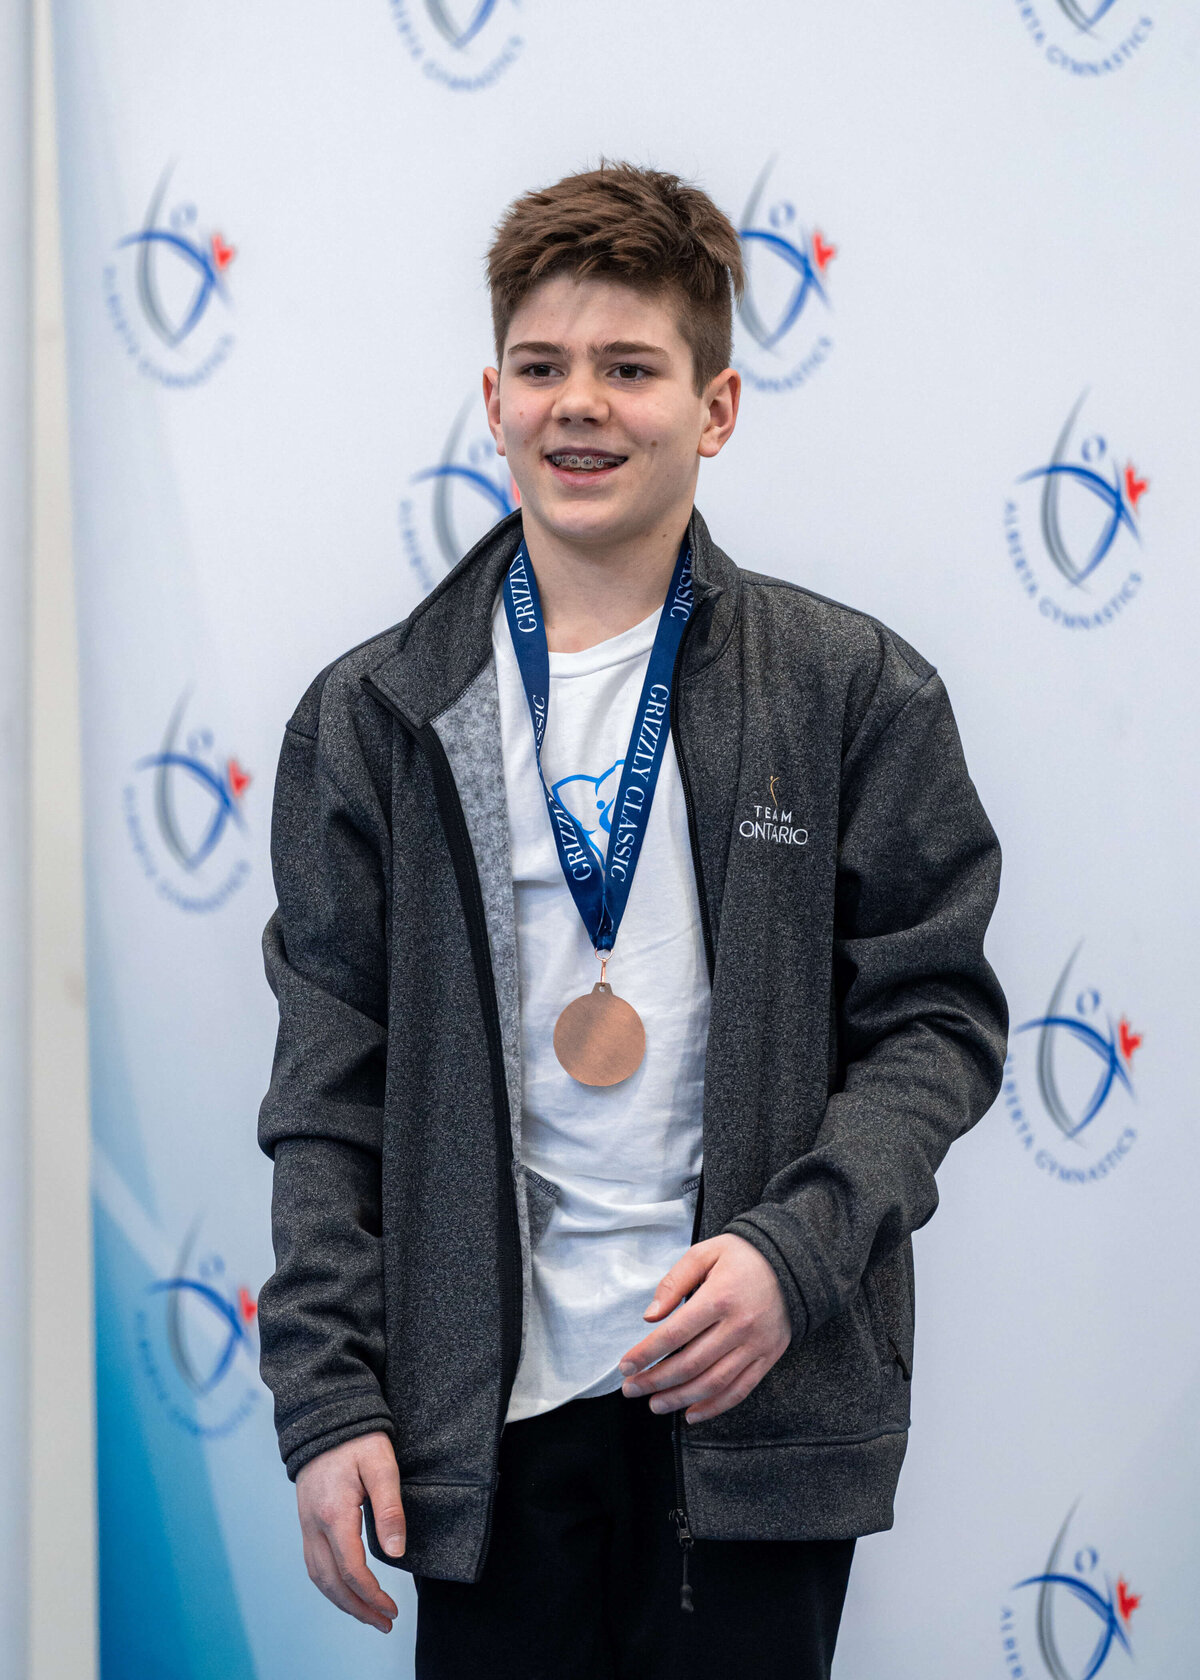 Photo by Luke O'Geil taken at the 2023 inaugural Grizzly Classic men's artistic gymnastics competitionA1_05670